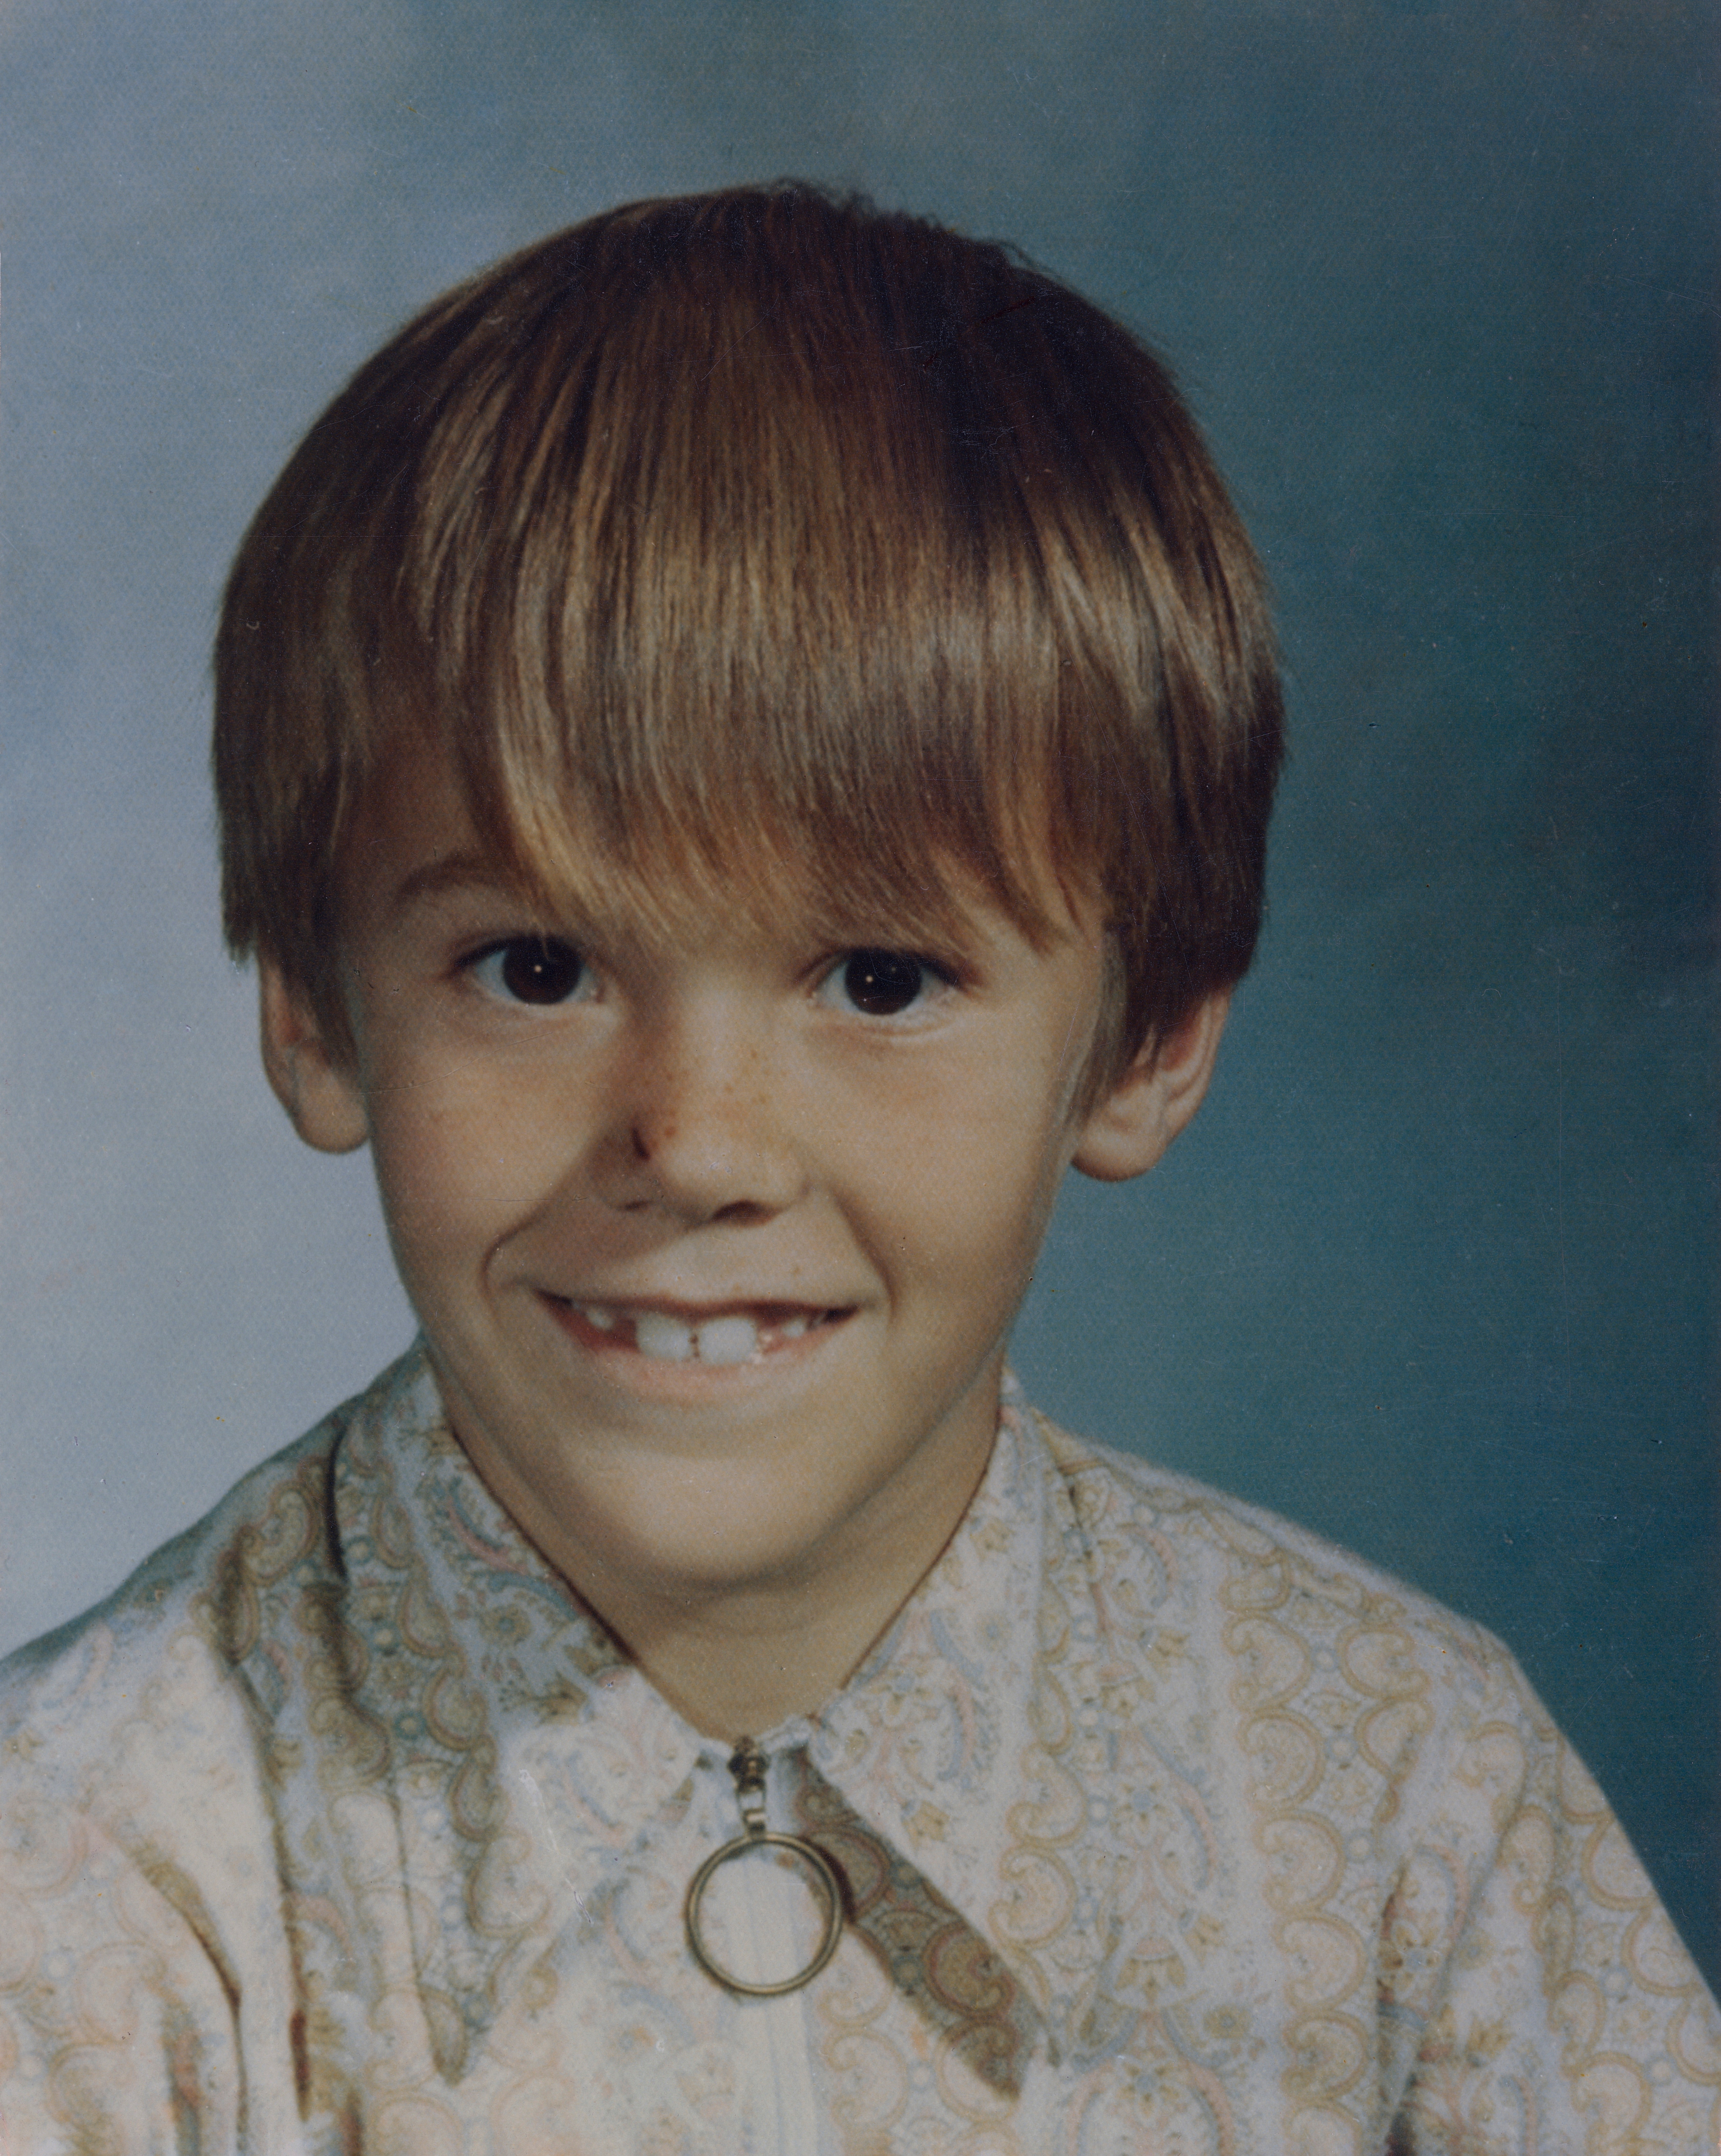 Steven Stayner as a child in the 1970s